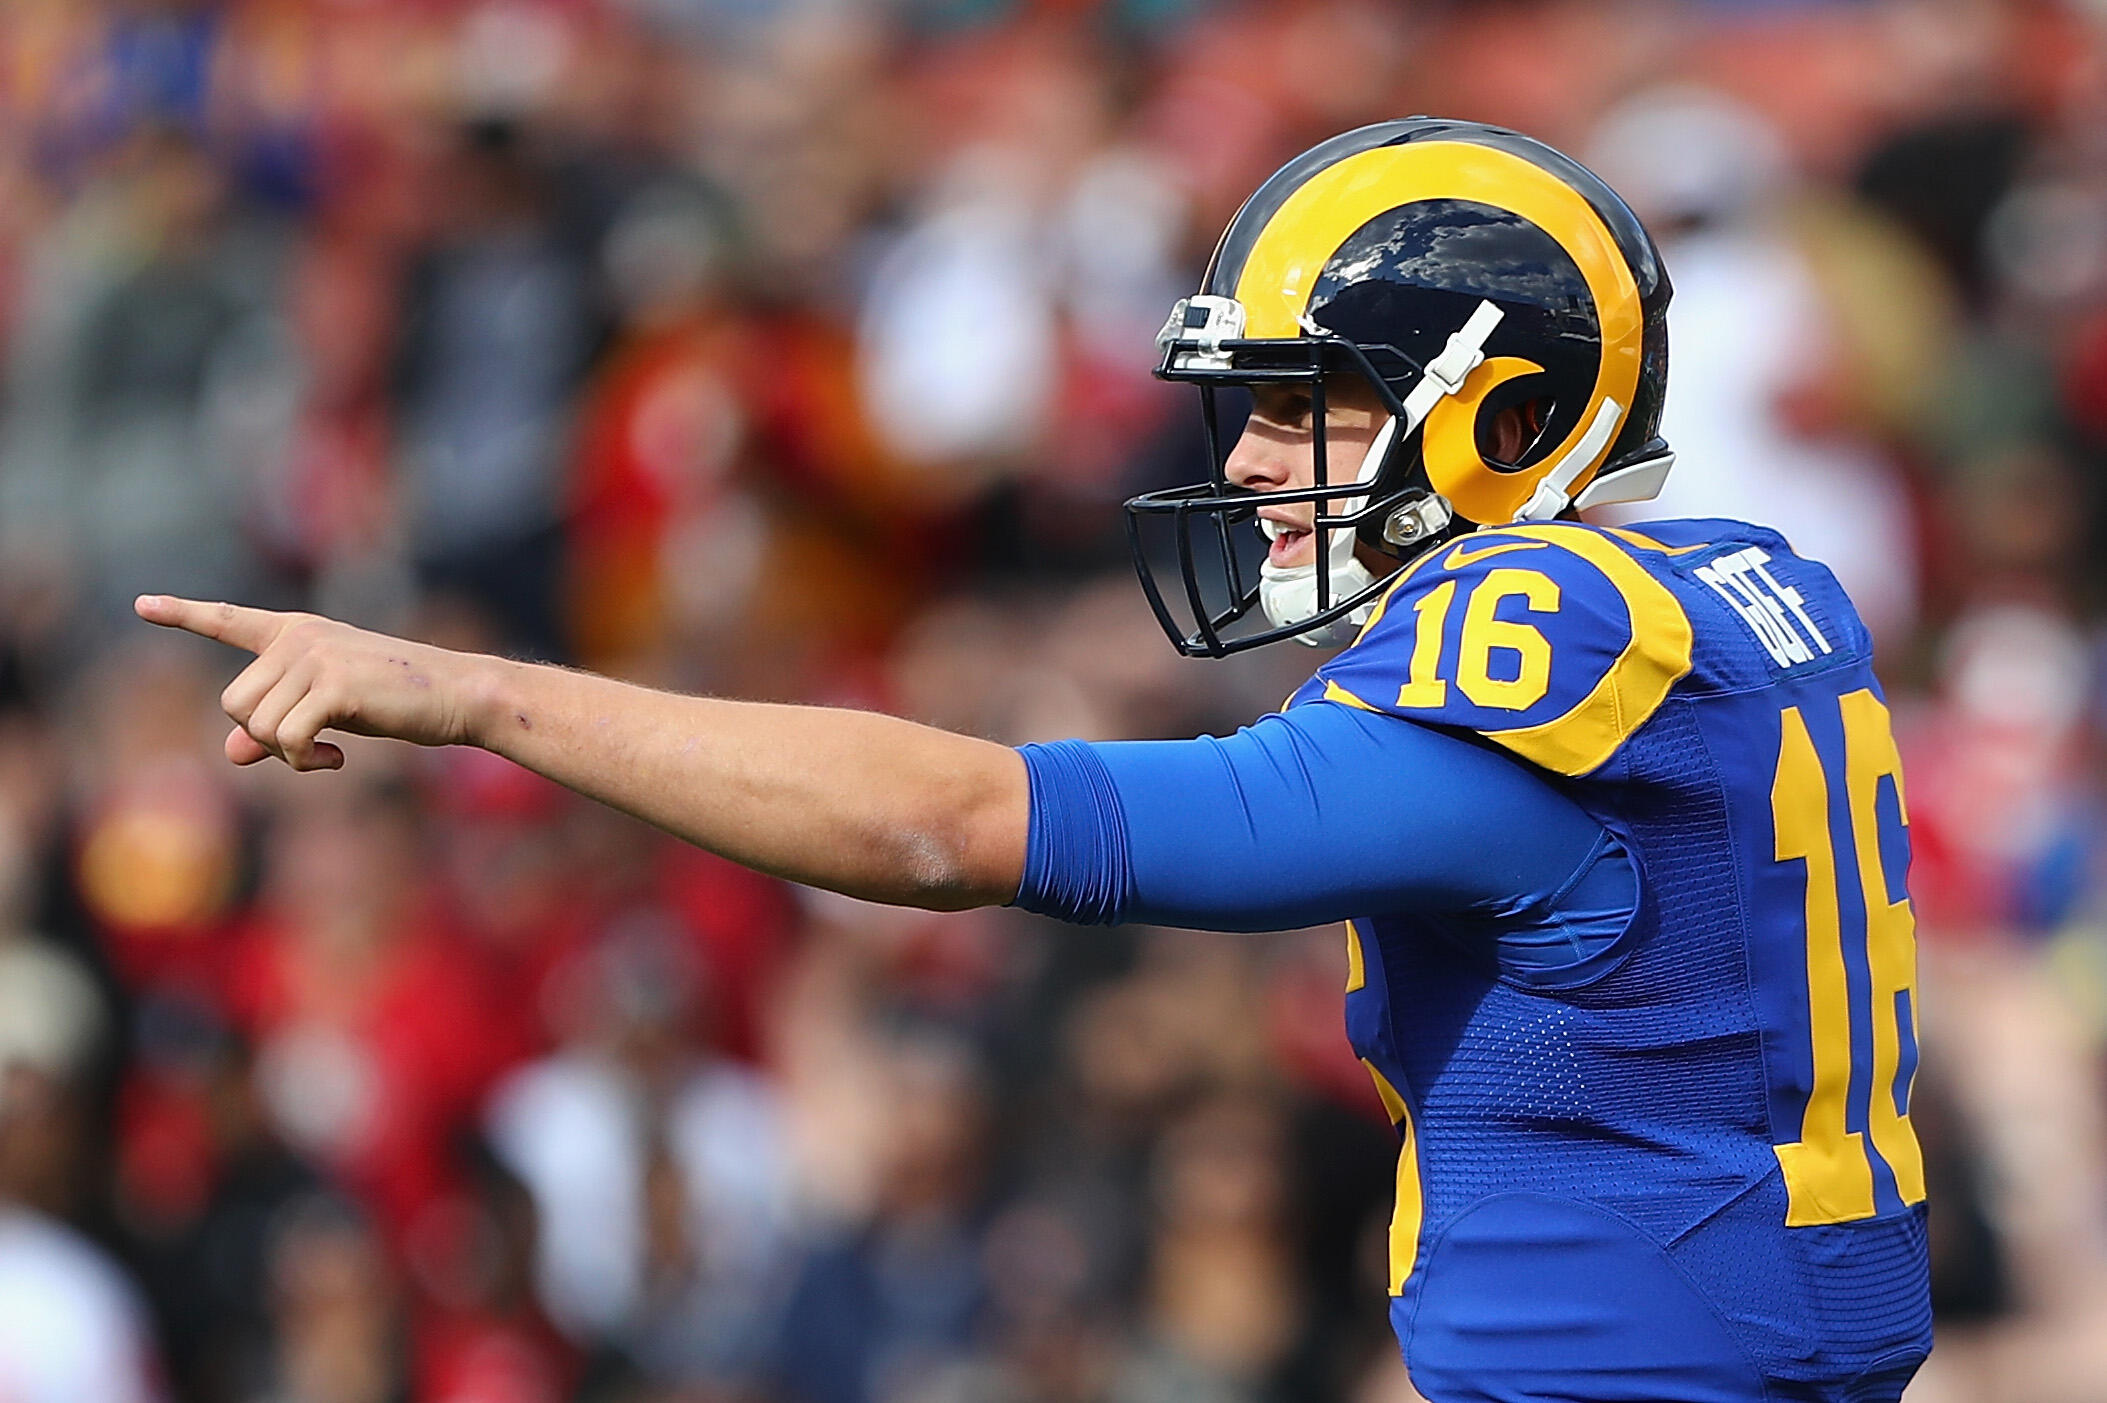 LOS ANGELES, CA - DECEMBER 24:  Jared Goff #16 of the Los Angeles Rams gestures during the game against the San Francisco 49ers at Los Angeles Memorial Coliseum on December 24, 2016 in Los Angeles, California.  (Photo by Tim Bradbury/Getty Images)